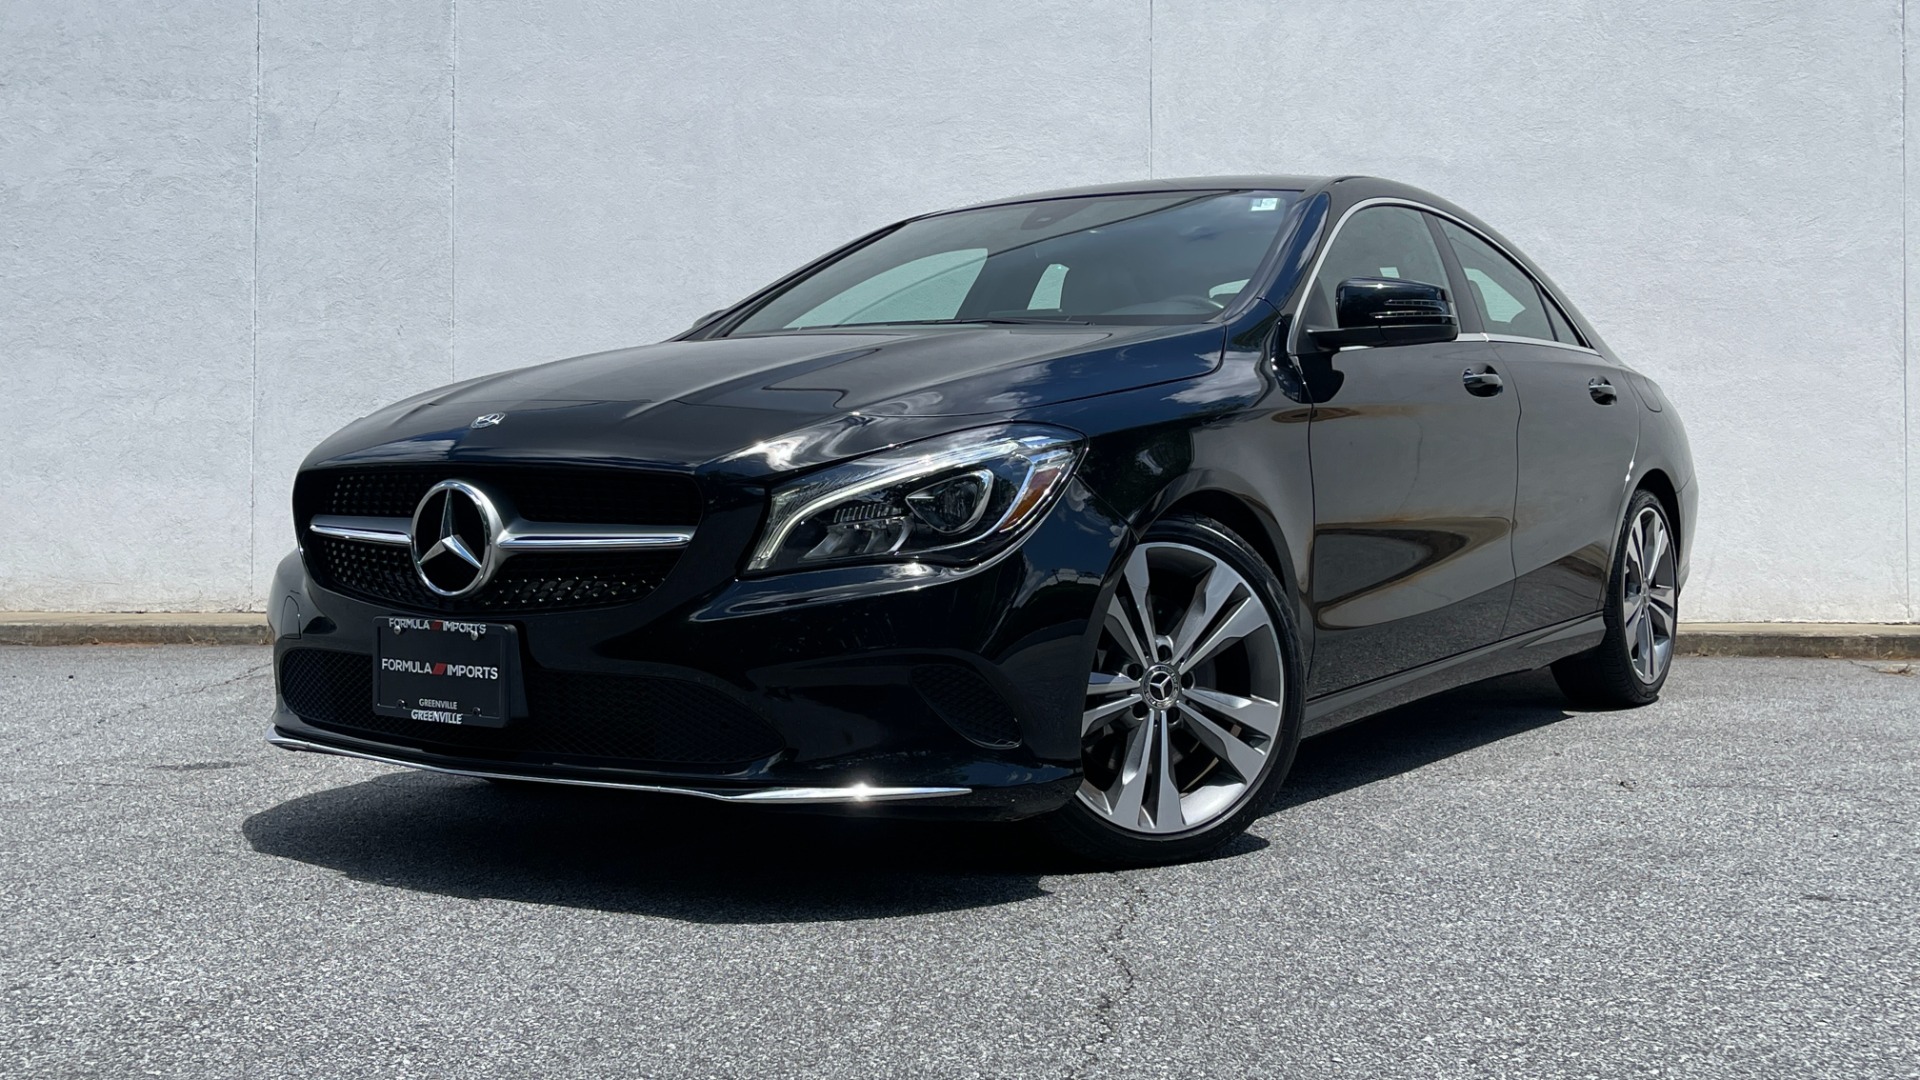 Used 2019 Mercedes-Benz CLA CLA 250 / PANORAMIC ROOF / PREMIUM / CONVENIENCE / HARMAN KARDON SOUND for sale $32,595 at Formula Imports in Charlotte NC 28227 1